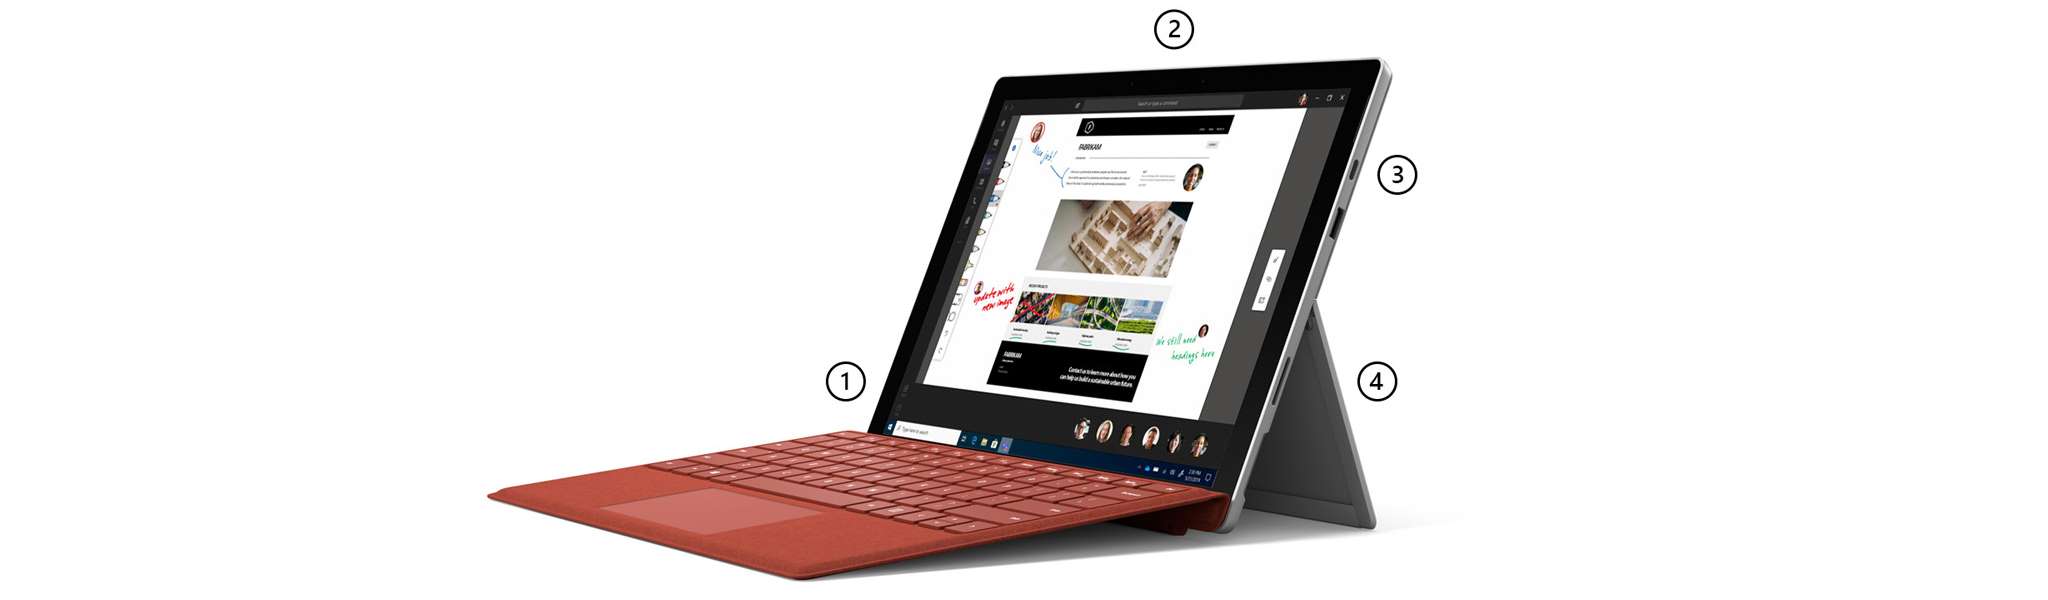 Microsoft Surface Pro 7 i3-1005G1 4GB/128GB/12.3T/W10P – Electronics  Outlet: Open Box New & NEW Electronics, TV's, Computers, Tablets, Printers  and Networking Gear